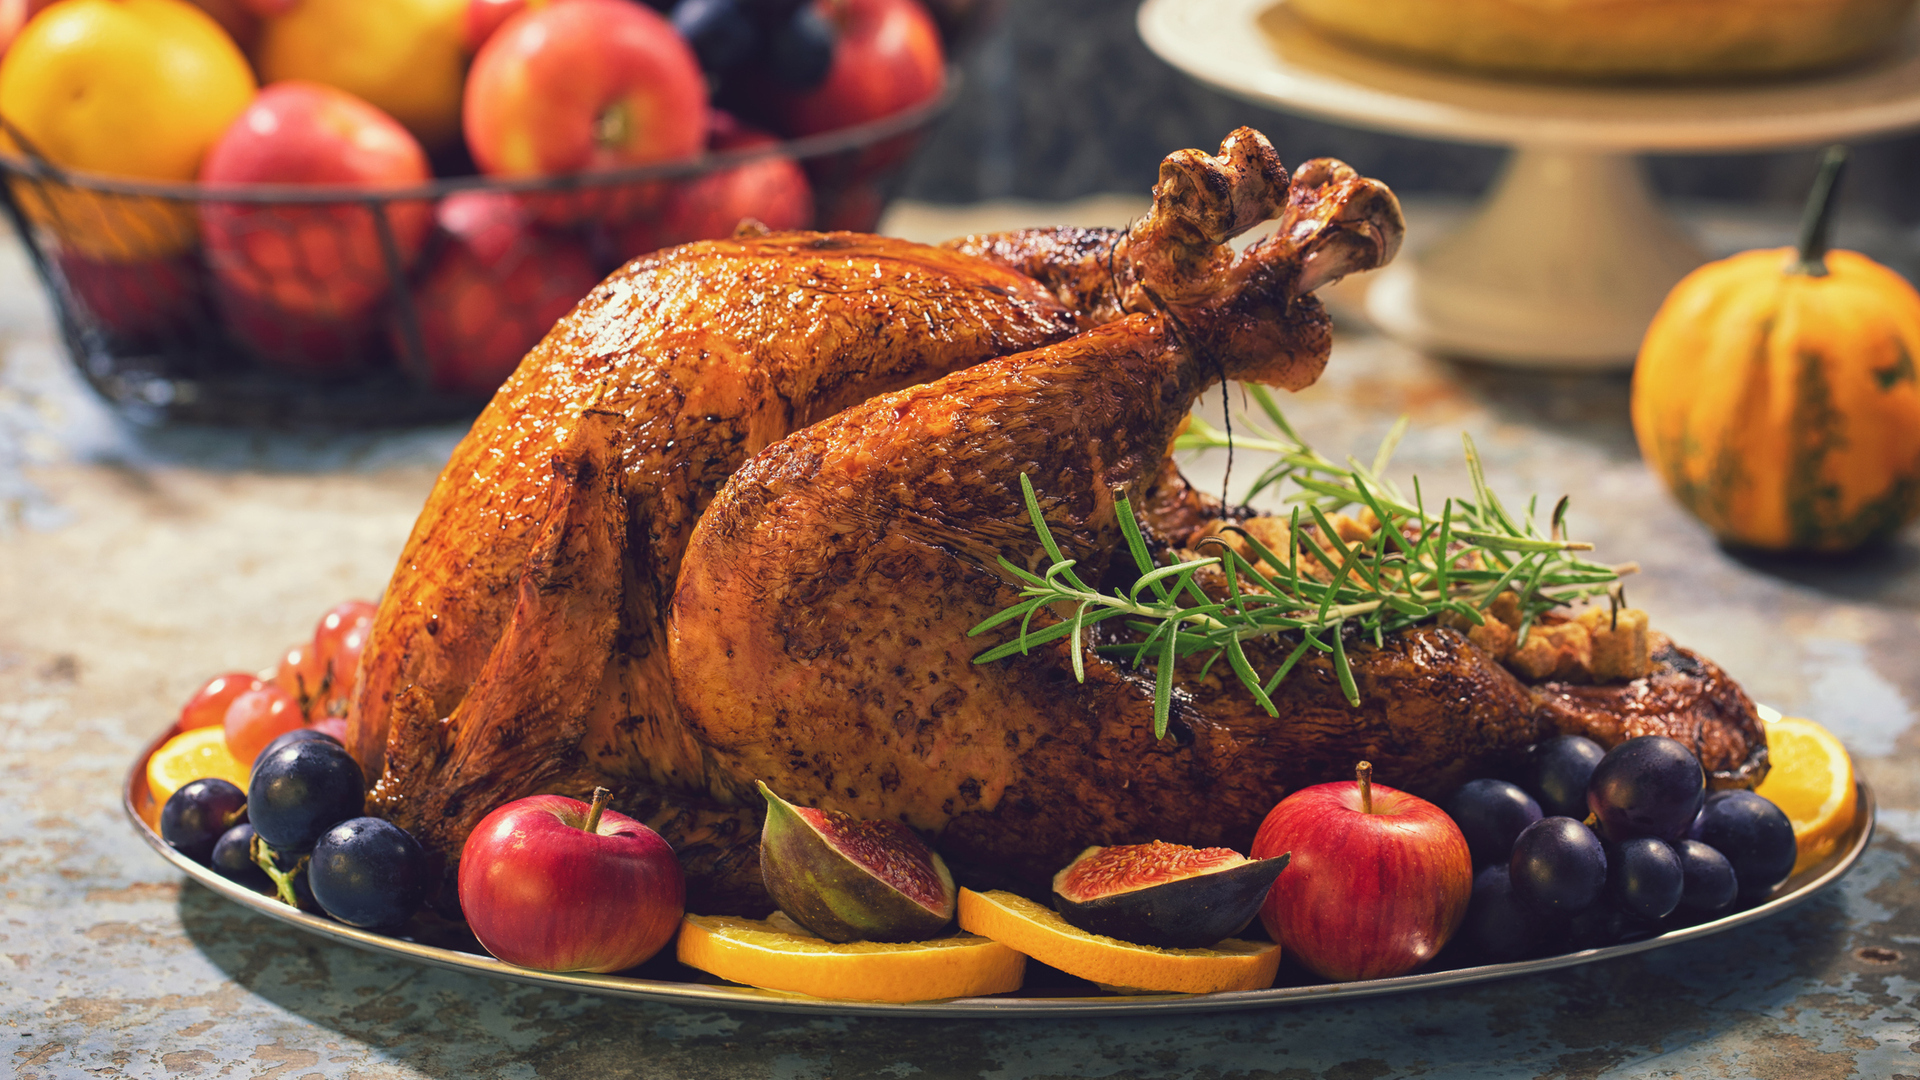 #How To Host Thanksgiving on a Budget